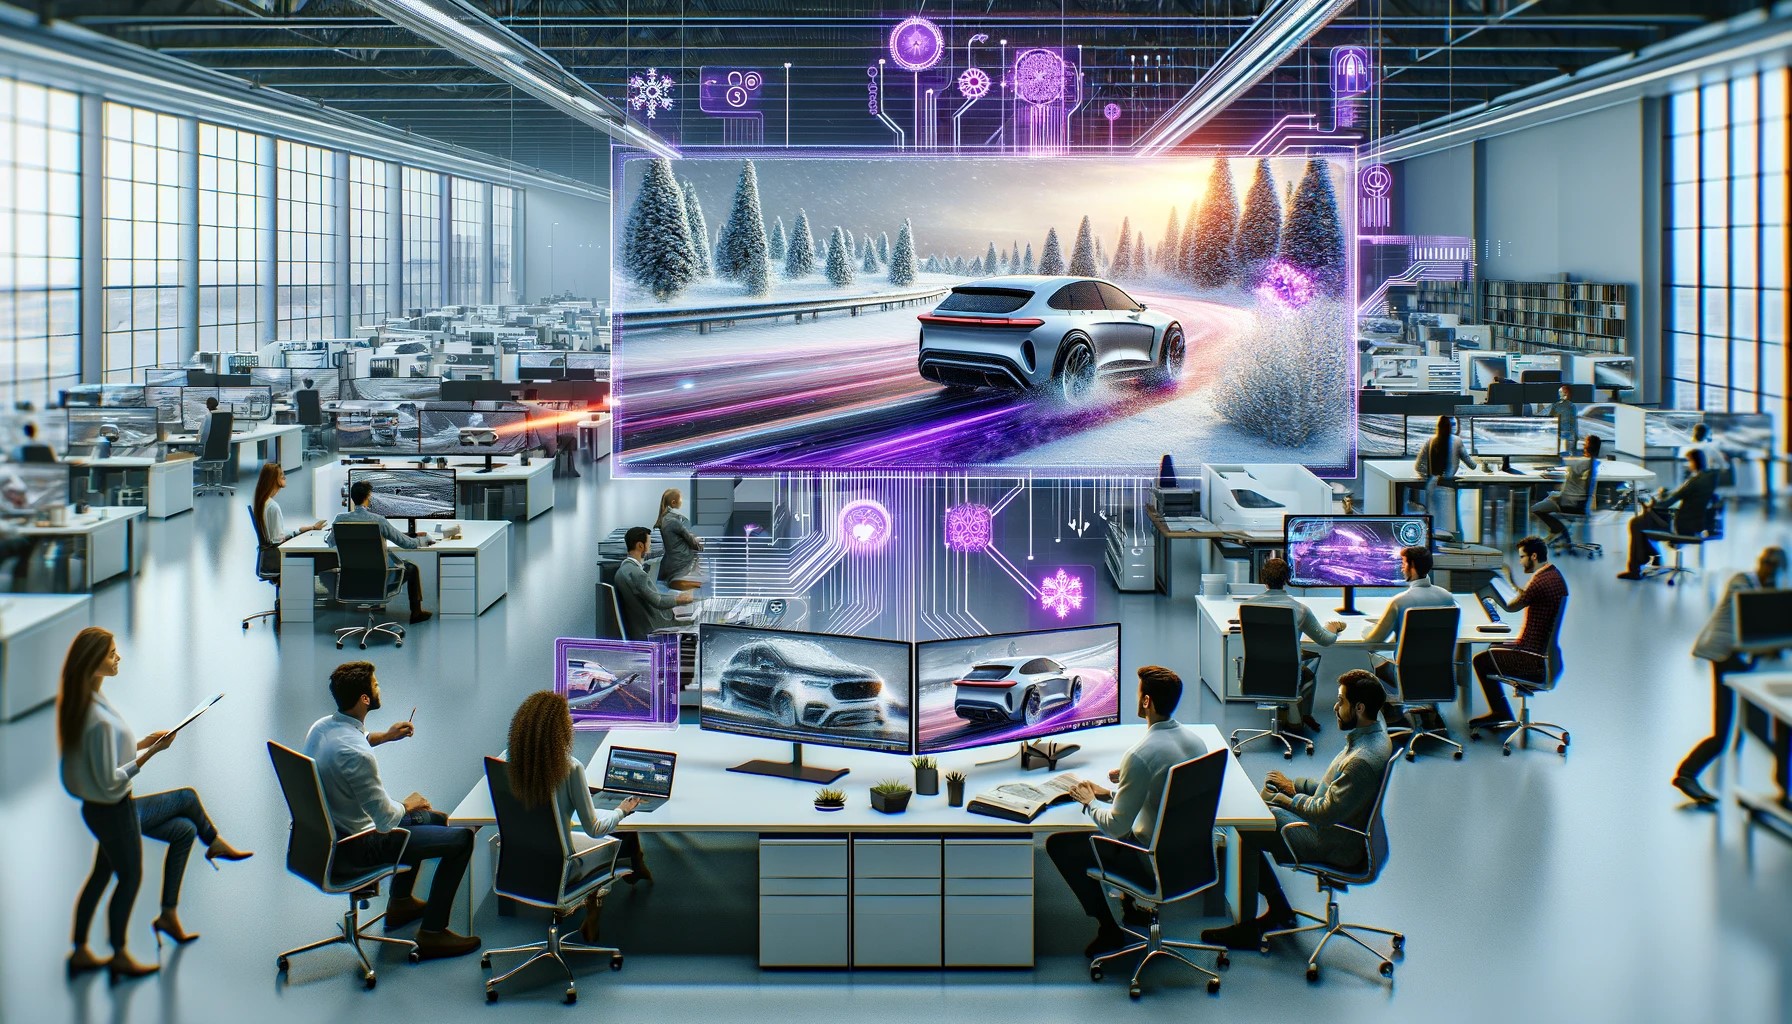 Futuristic automotive design studio where creative professionals work on innovative car concepts with advanced virtual reality technology within a high-tech environment, simplifying data analysis to enhance decision-making.